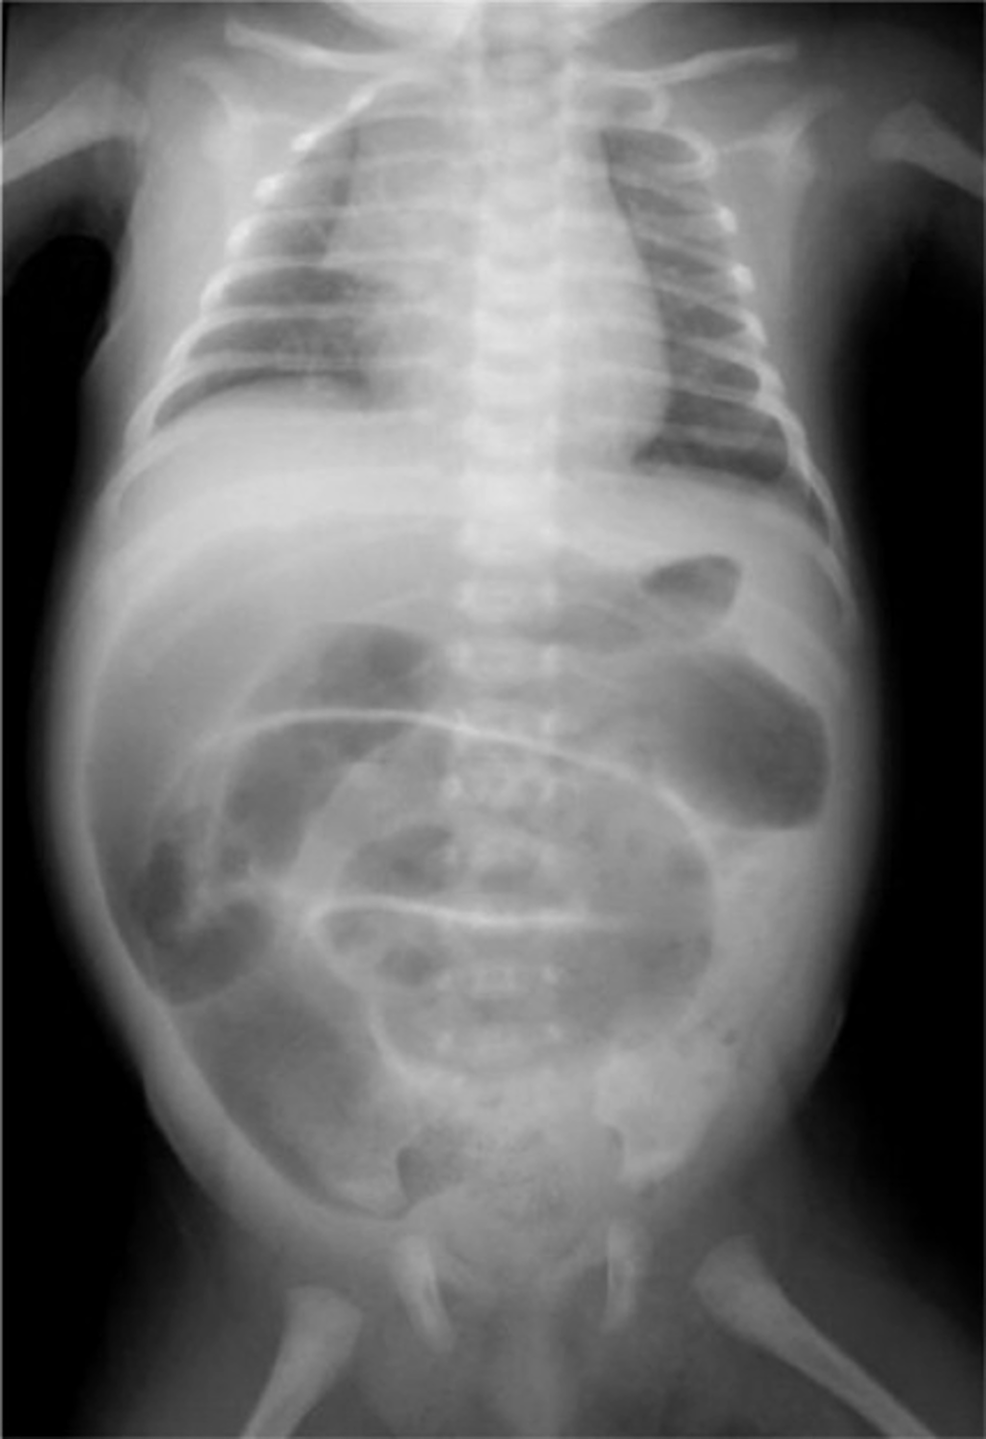 Abdominal-plain-X-ray-shows-a-generalized-distention-of-the-loops-of-the-large-intestine.-Typical-findings-of-Hirschsprung-disease-were-seen.-(Consent-was-obtained-to-publish-this-radiograph).